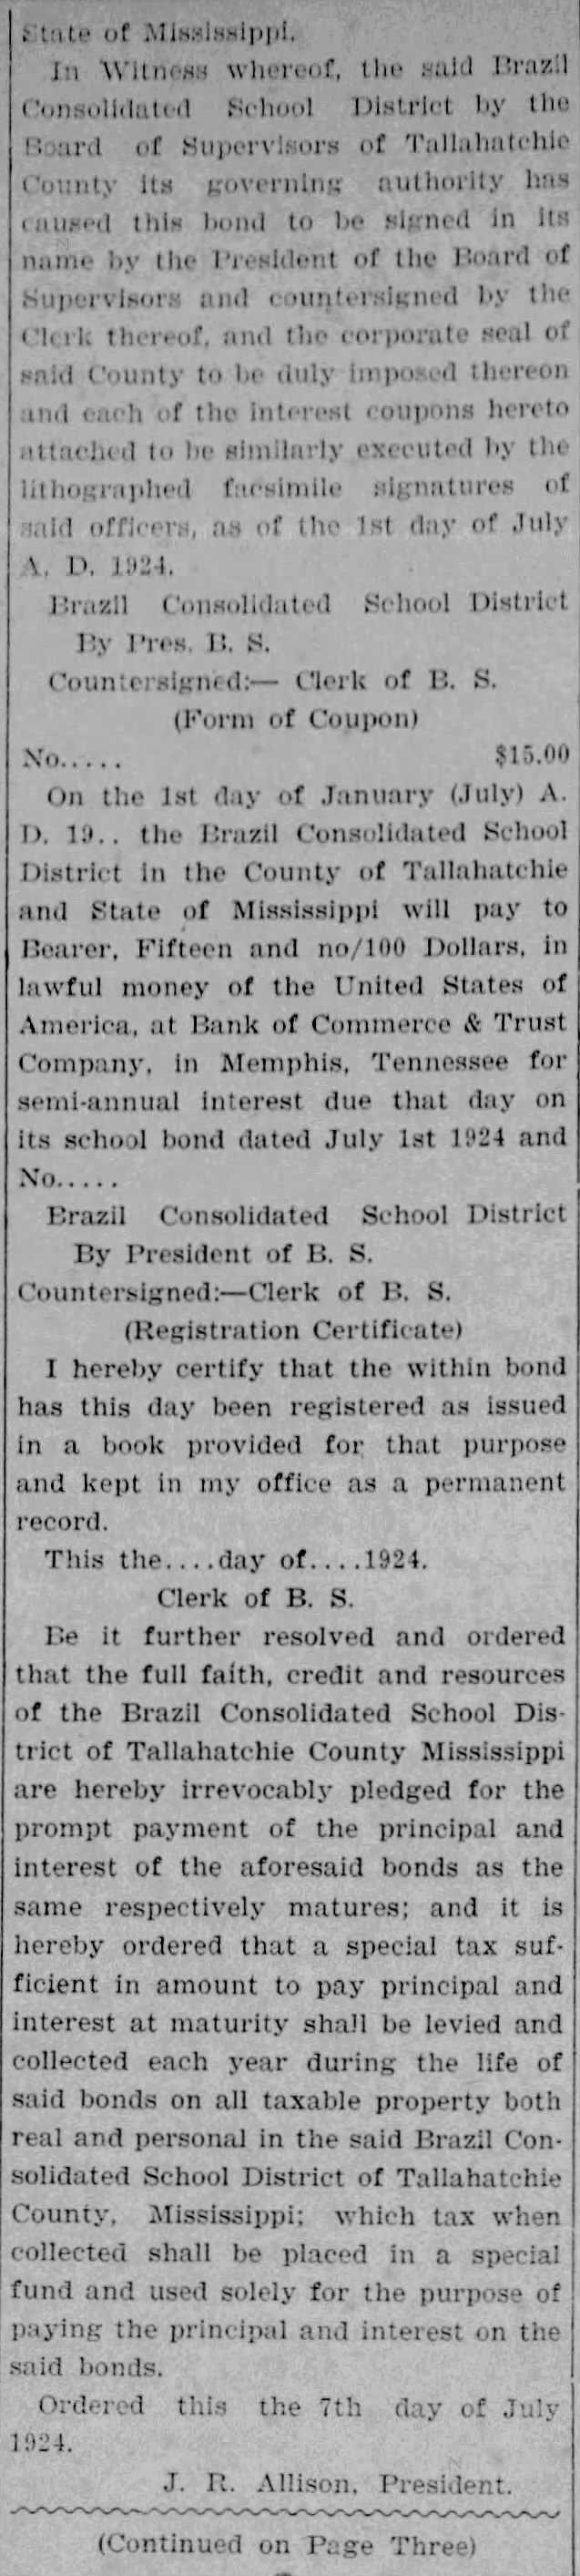 For Brazil, Mississippi (to prove existence of former school district in the 1920s)